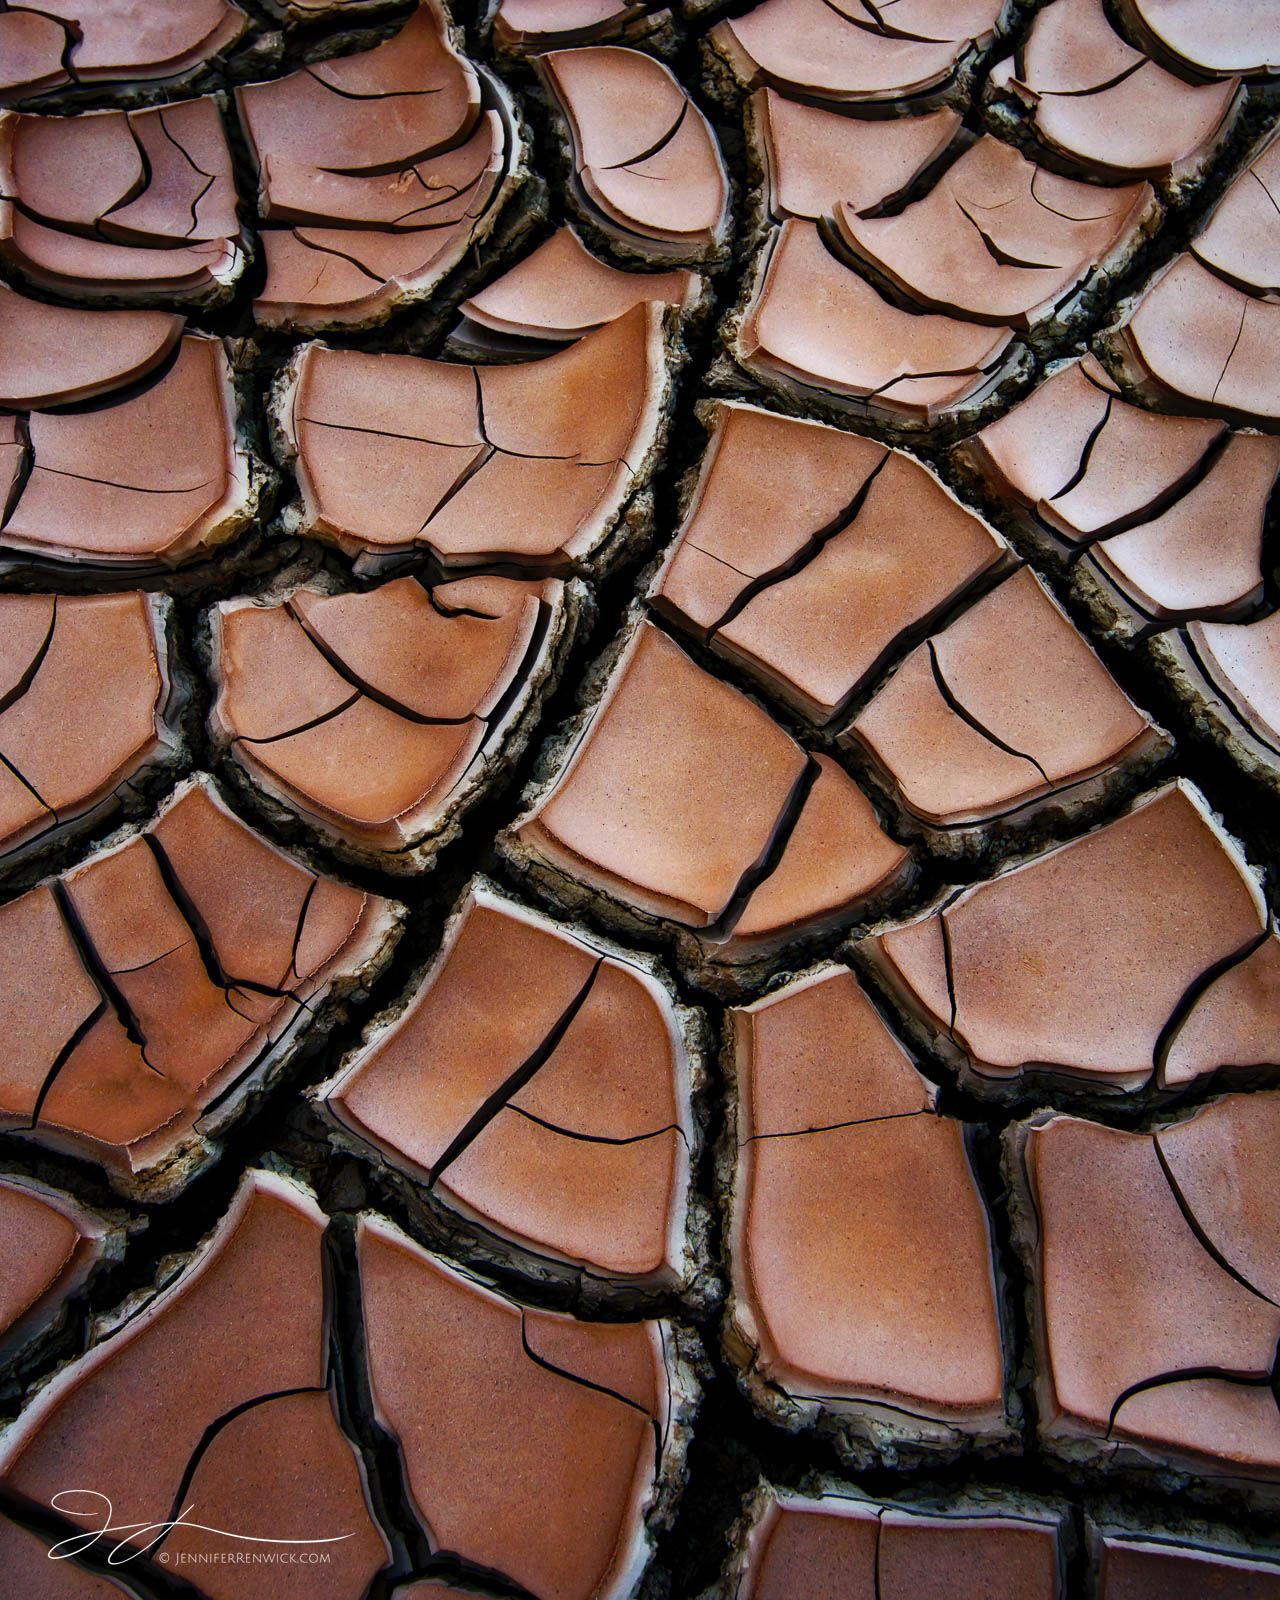 Mud drying on the desert floor expands and cracks under the stress of the arid environment creating unique tiles.